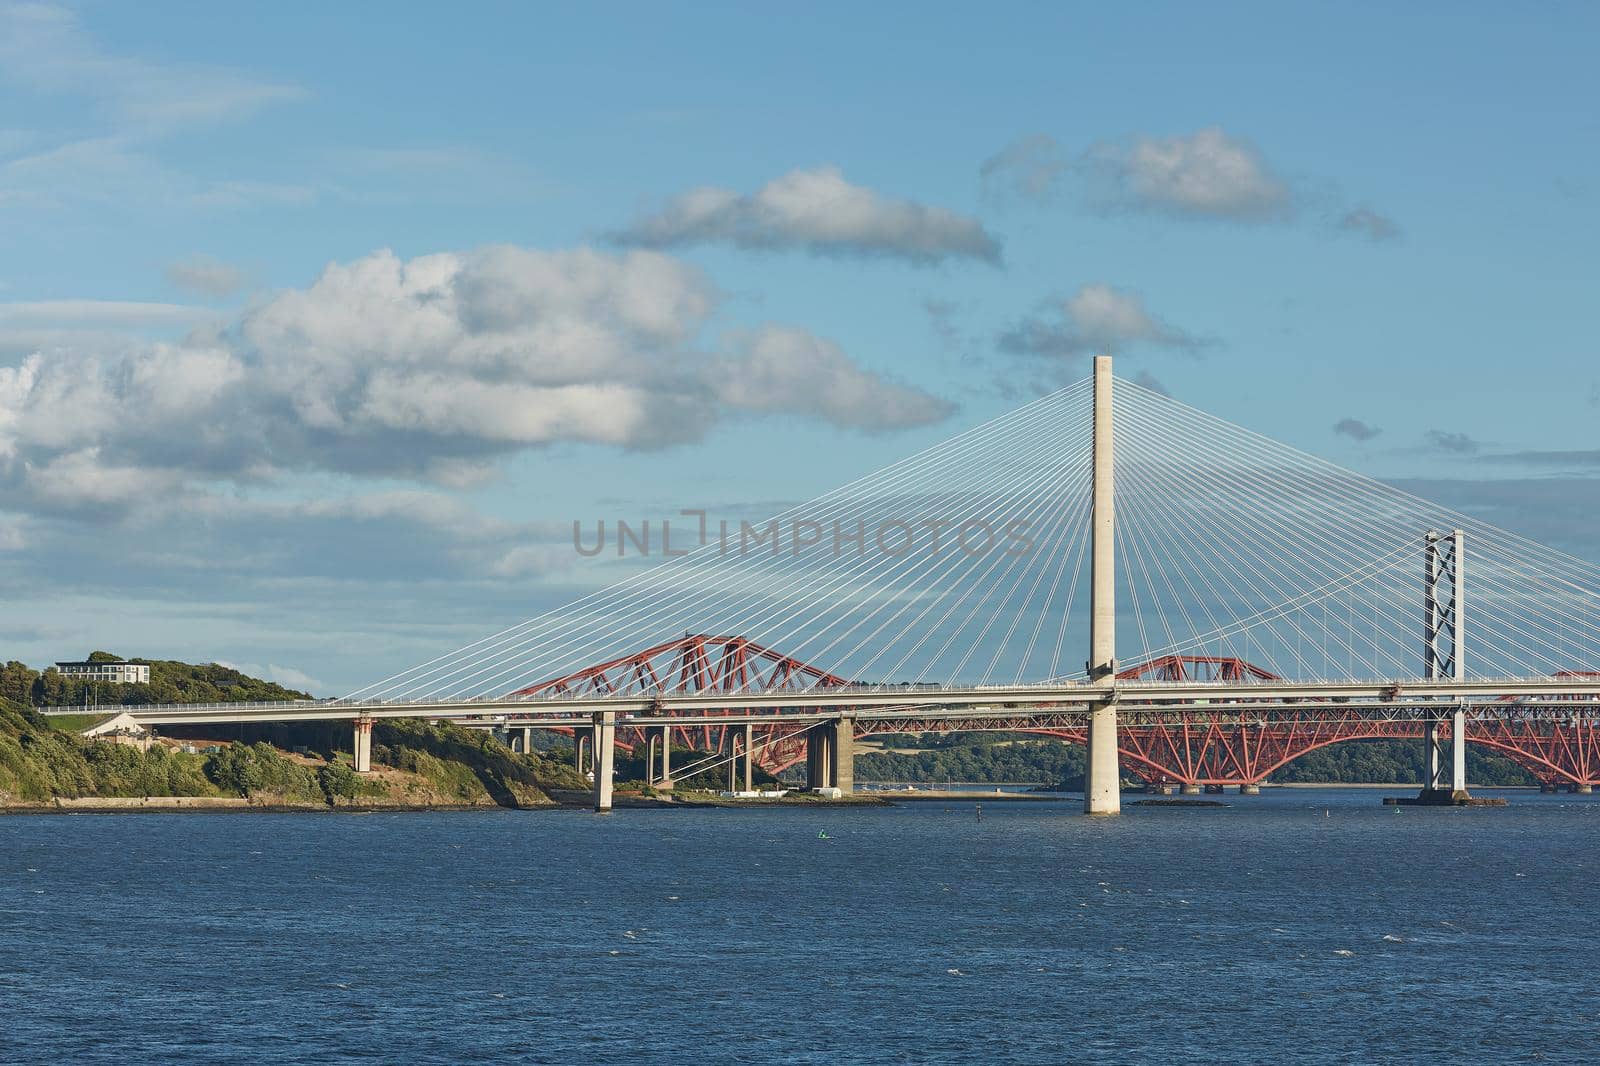 The new Queensferry Crossing bridge over the Firth of Forth with the older Forth Road bridge and the iconic Forth Rail Bridge in Edinburgh Scotland. by wondry